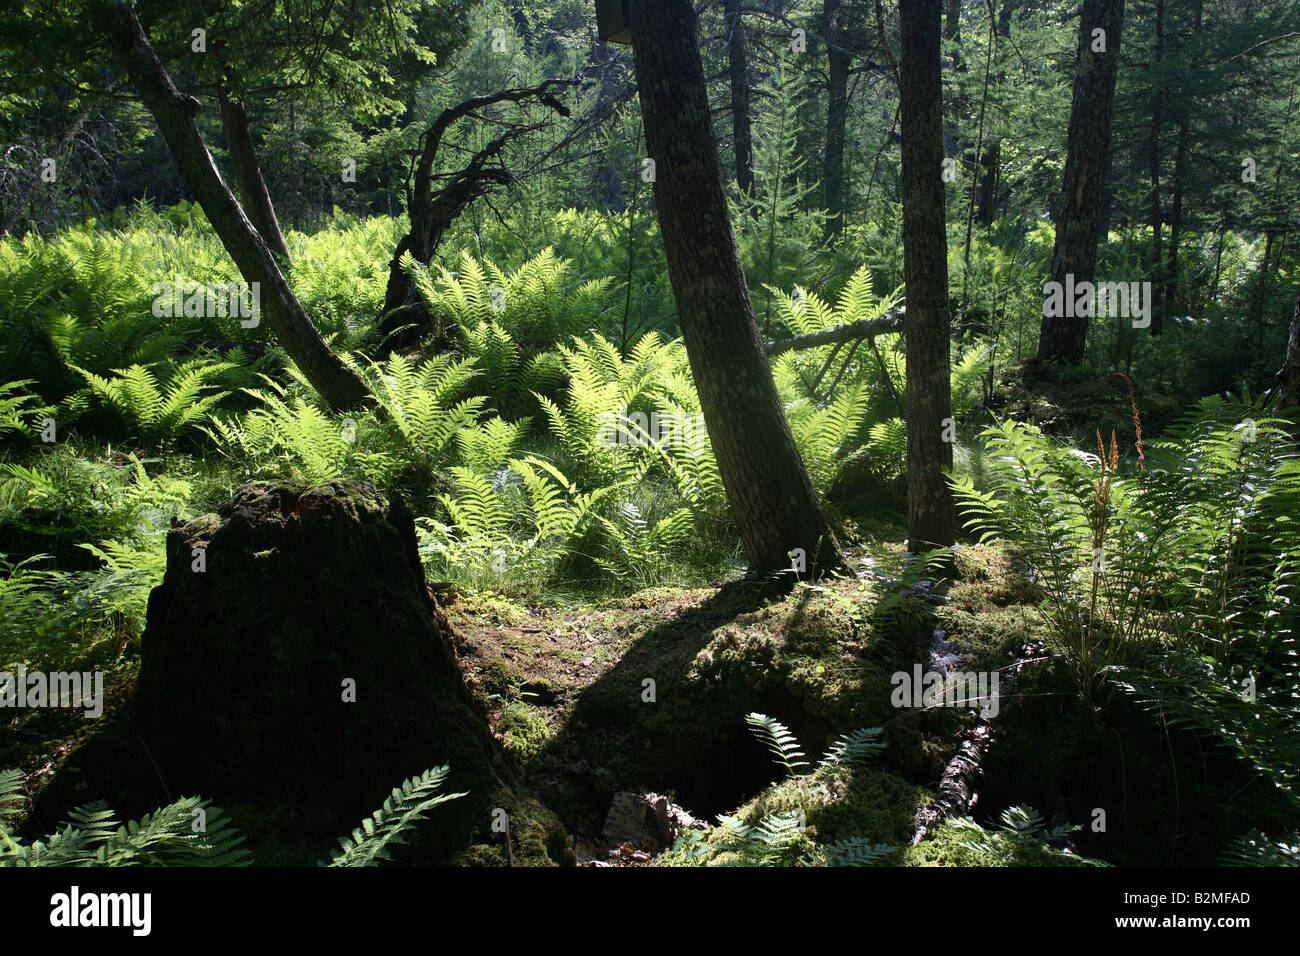 View of a forest in the remote Northwoods of northern Wisconsin Stock Photo